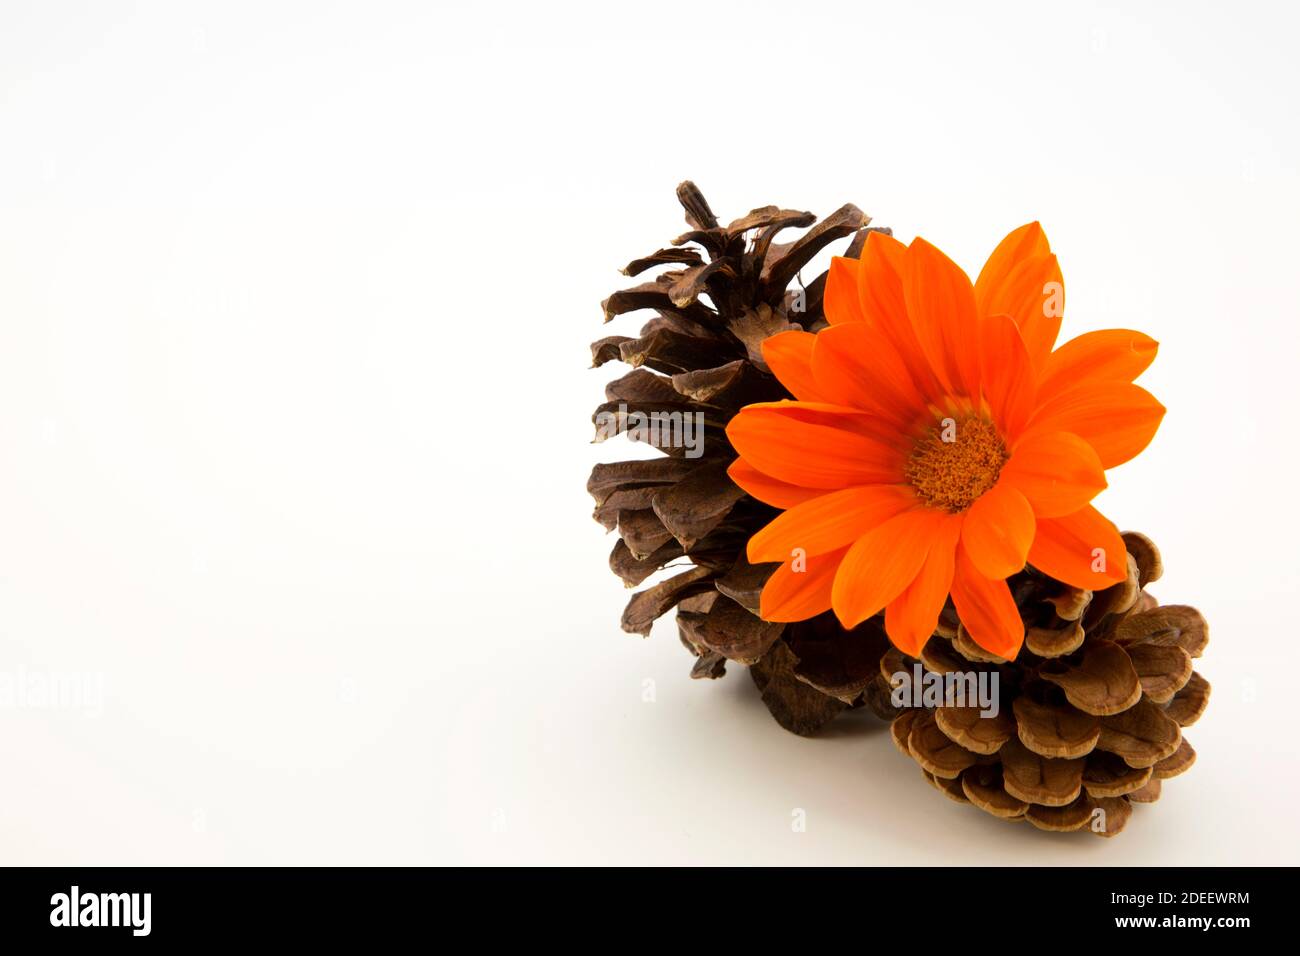 Lovely glowing orange of daisy like gazania blossom placed with autumn pine cones on white background with ample copy space Stock Photo